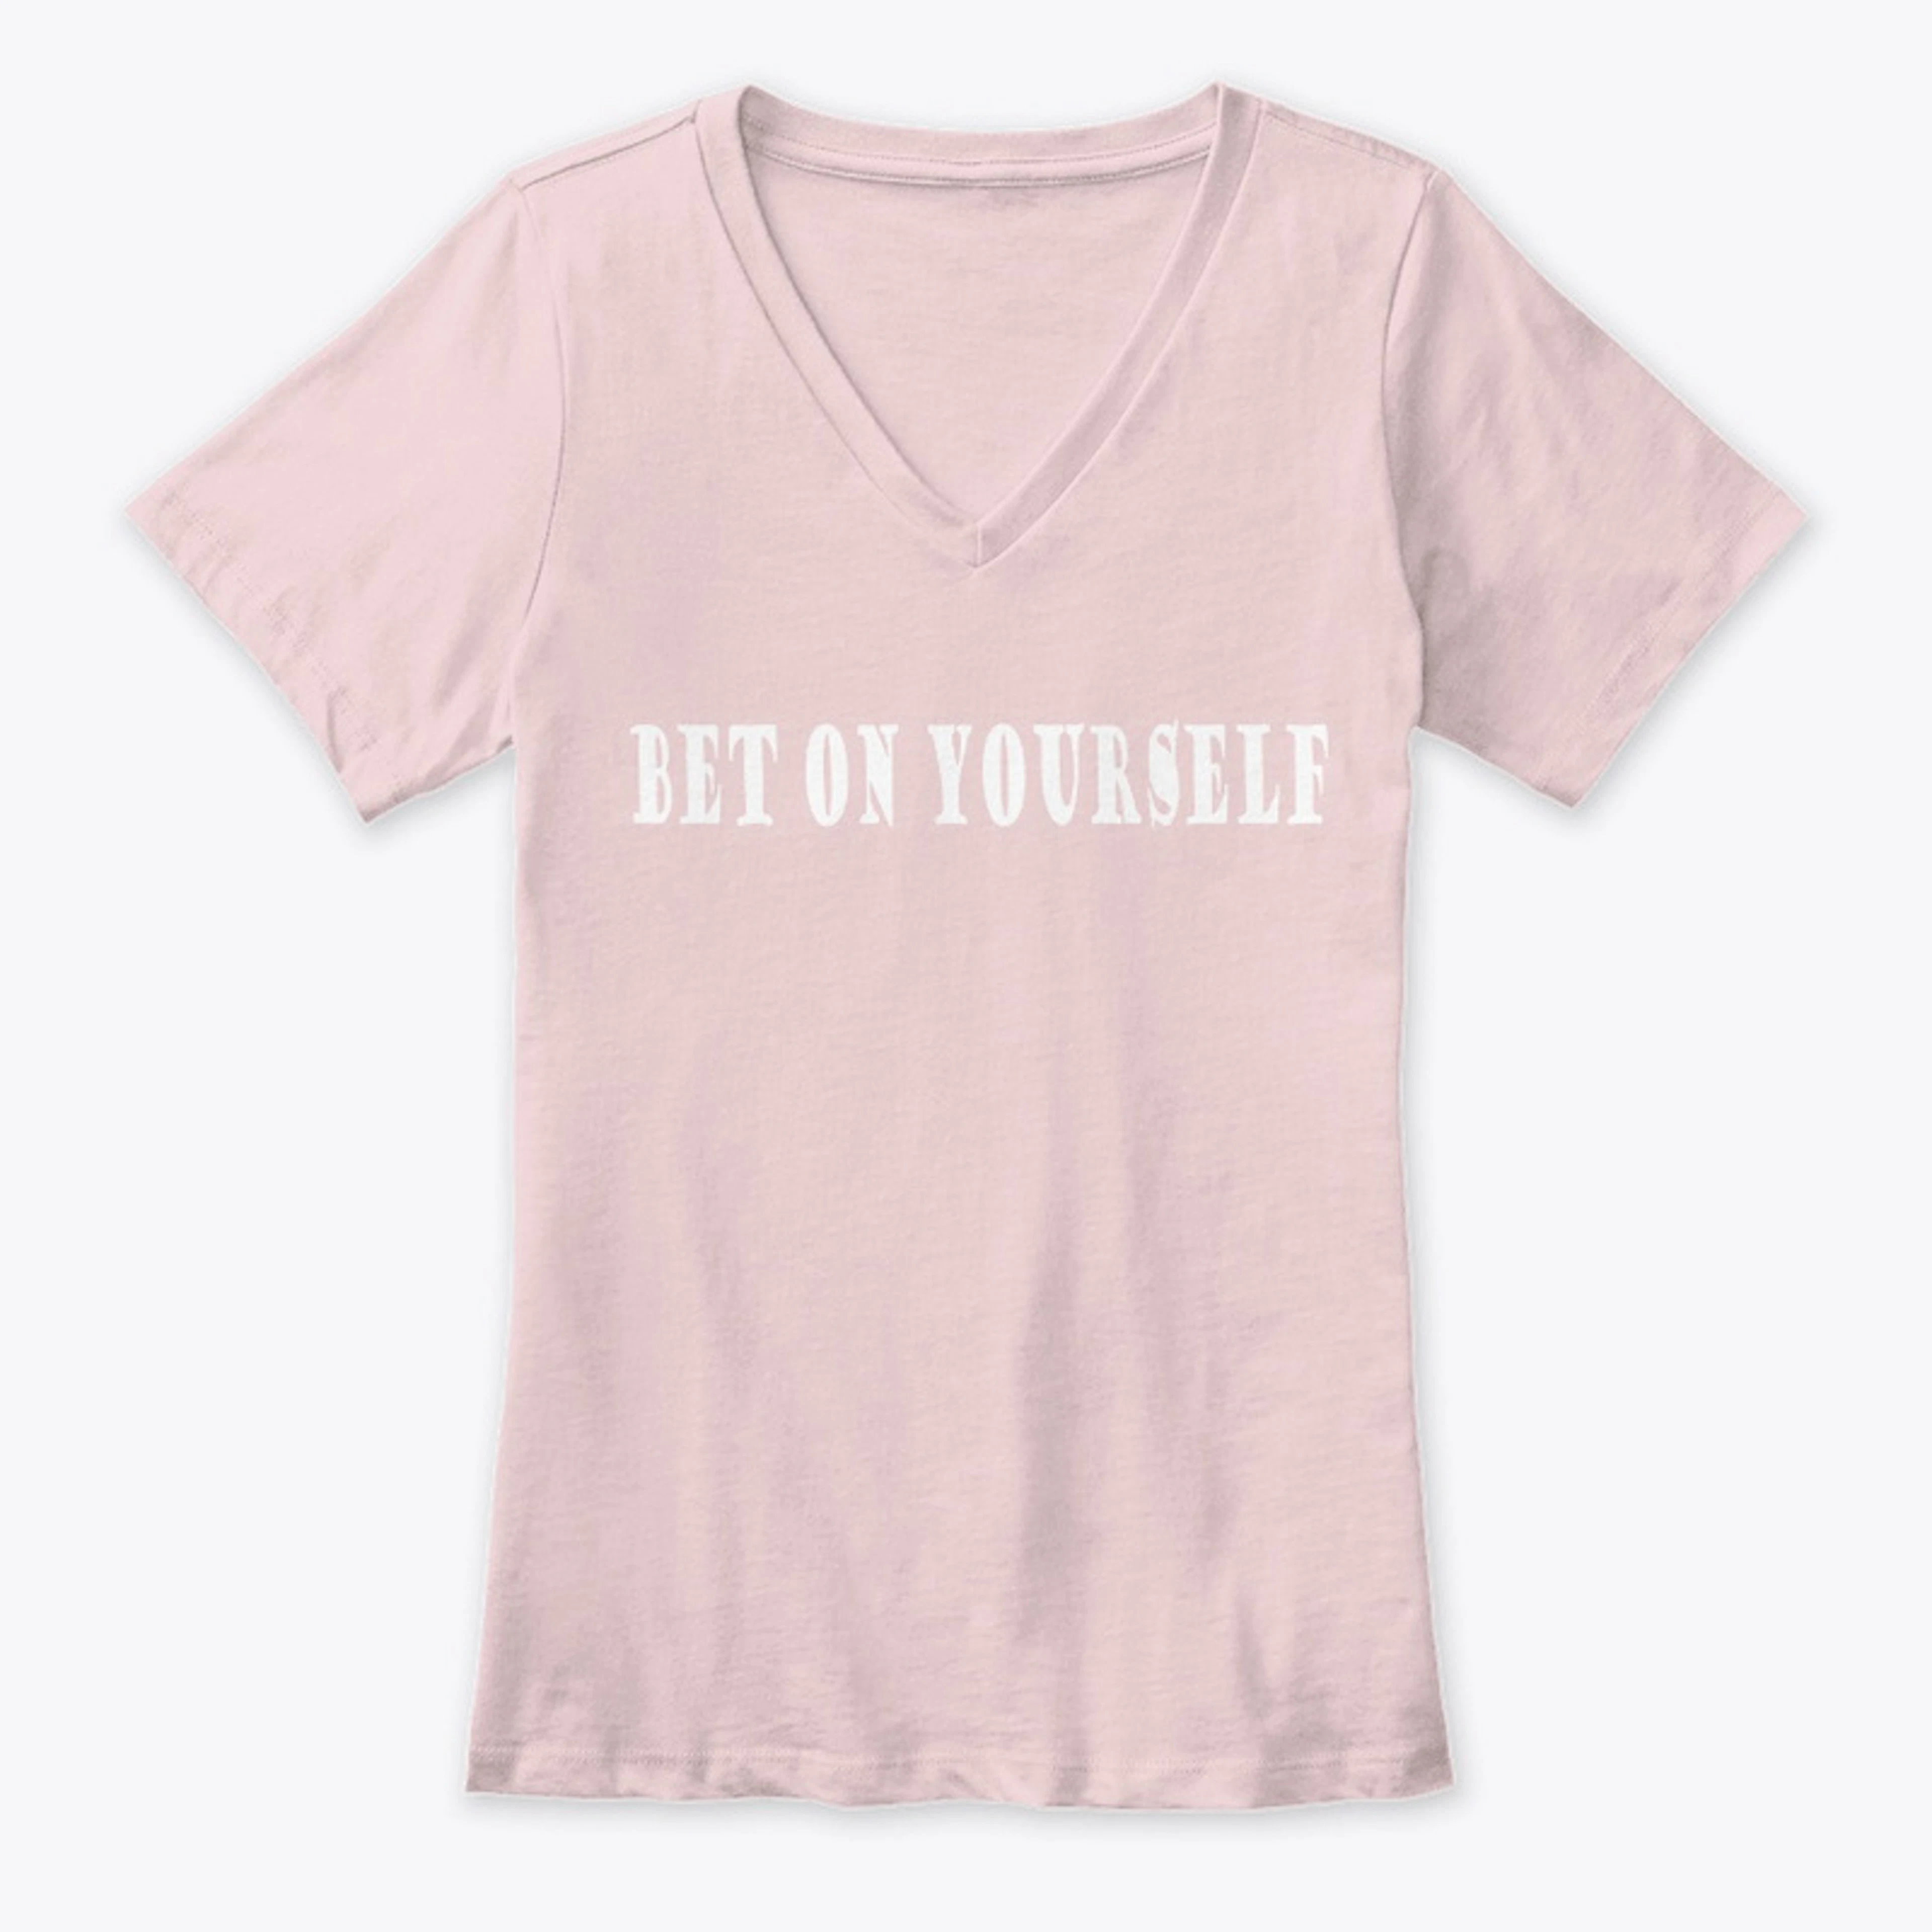 Bet on Yourself, ladies T